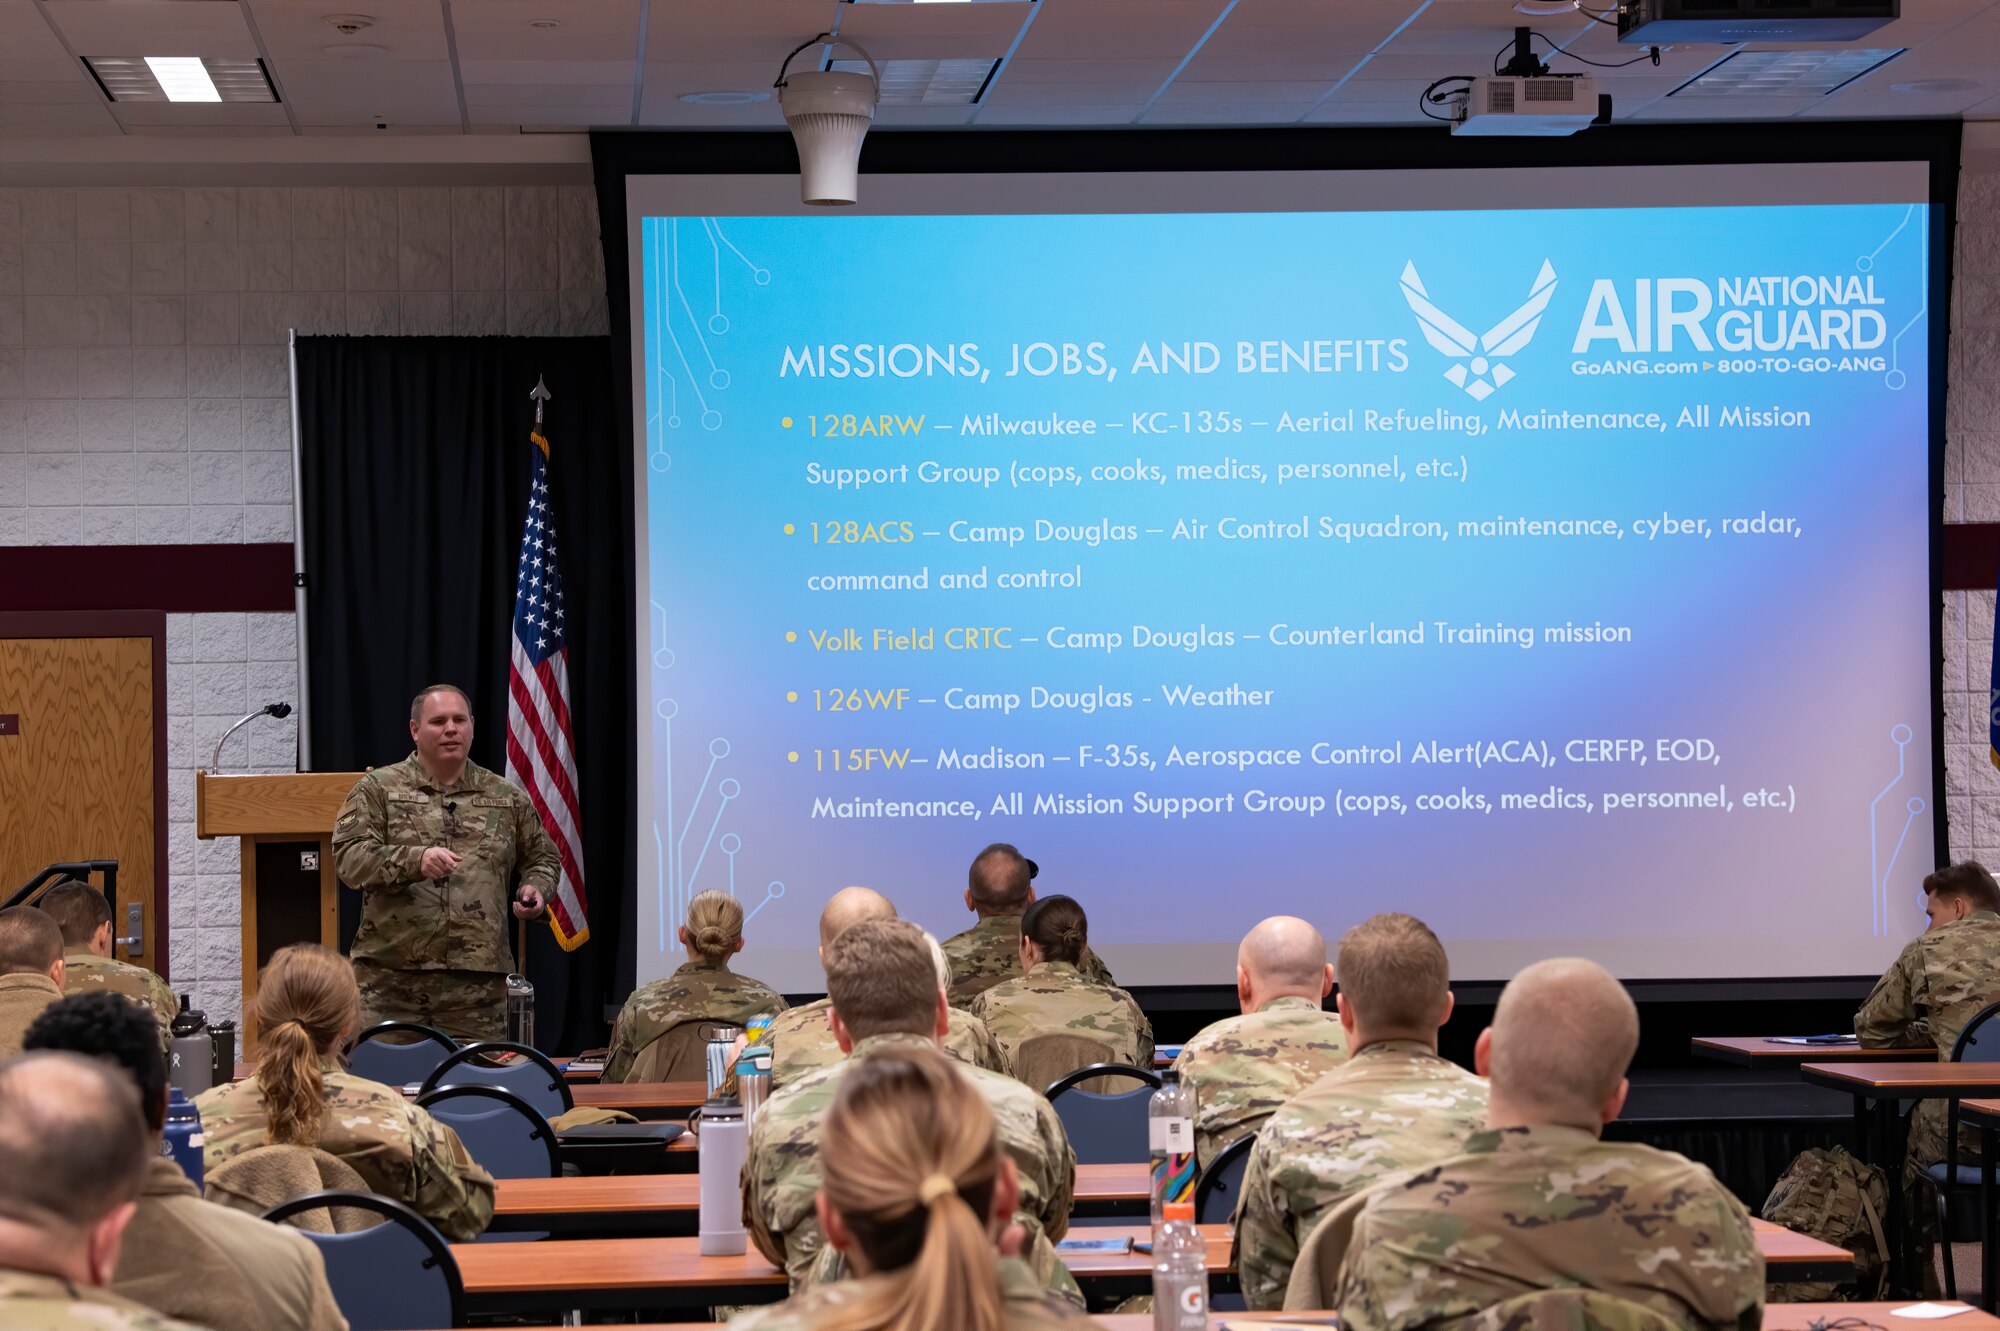 U.S. Air Force Chief Master Sgt. Zachary Brewer, recruiting and retention senior enlisted leader for the Wisconsin Air National Guard, introduces Airmen attending the State Enlisted Development Program to the Wisconsin ANG Influencer initiative Jan. 12, 2023, at Volk Field Air National Guard Base near Camp Douglas, Wisconsin. The January SEDP course marks the tenth year in which the program has contributed to the personal and professional development of enlisted Airmen throughout Wisconsin. (U.S. Air National Guard photo by Senior Master Sgt. Paul Gorman)